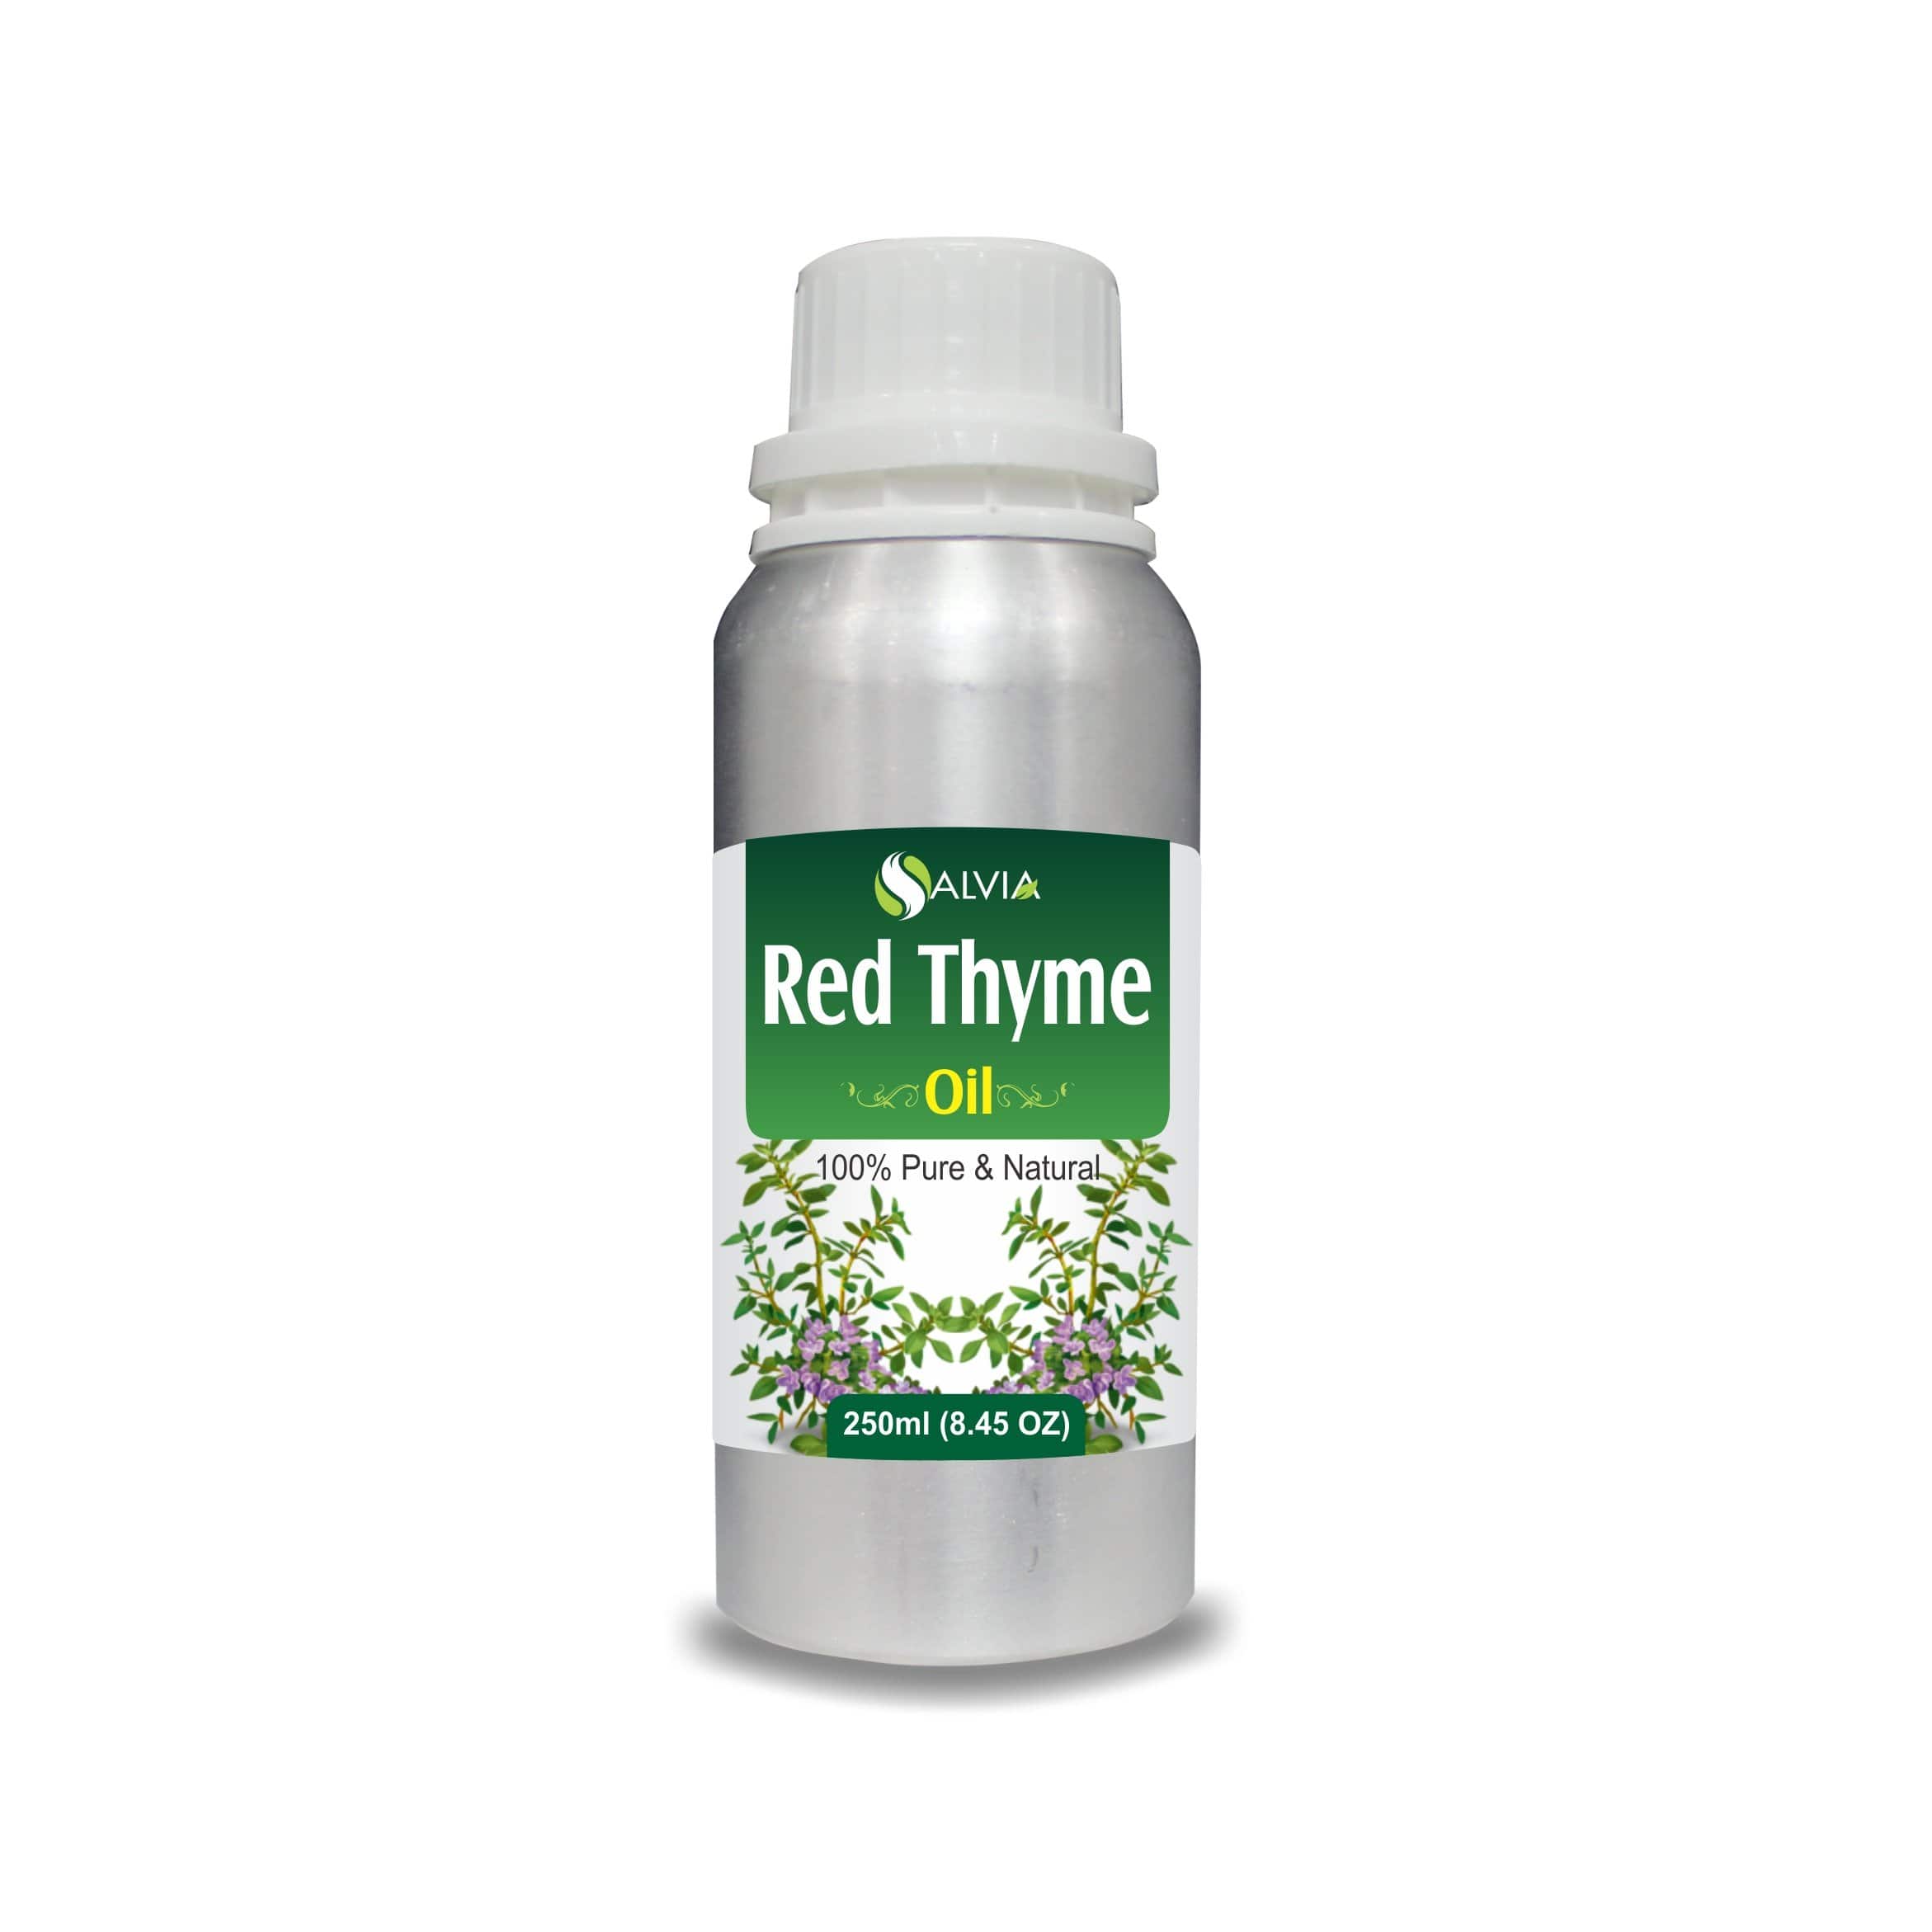 red thyme essential oil benefits